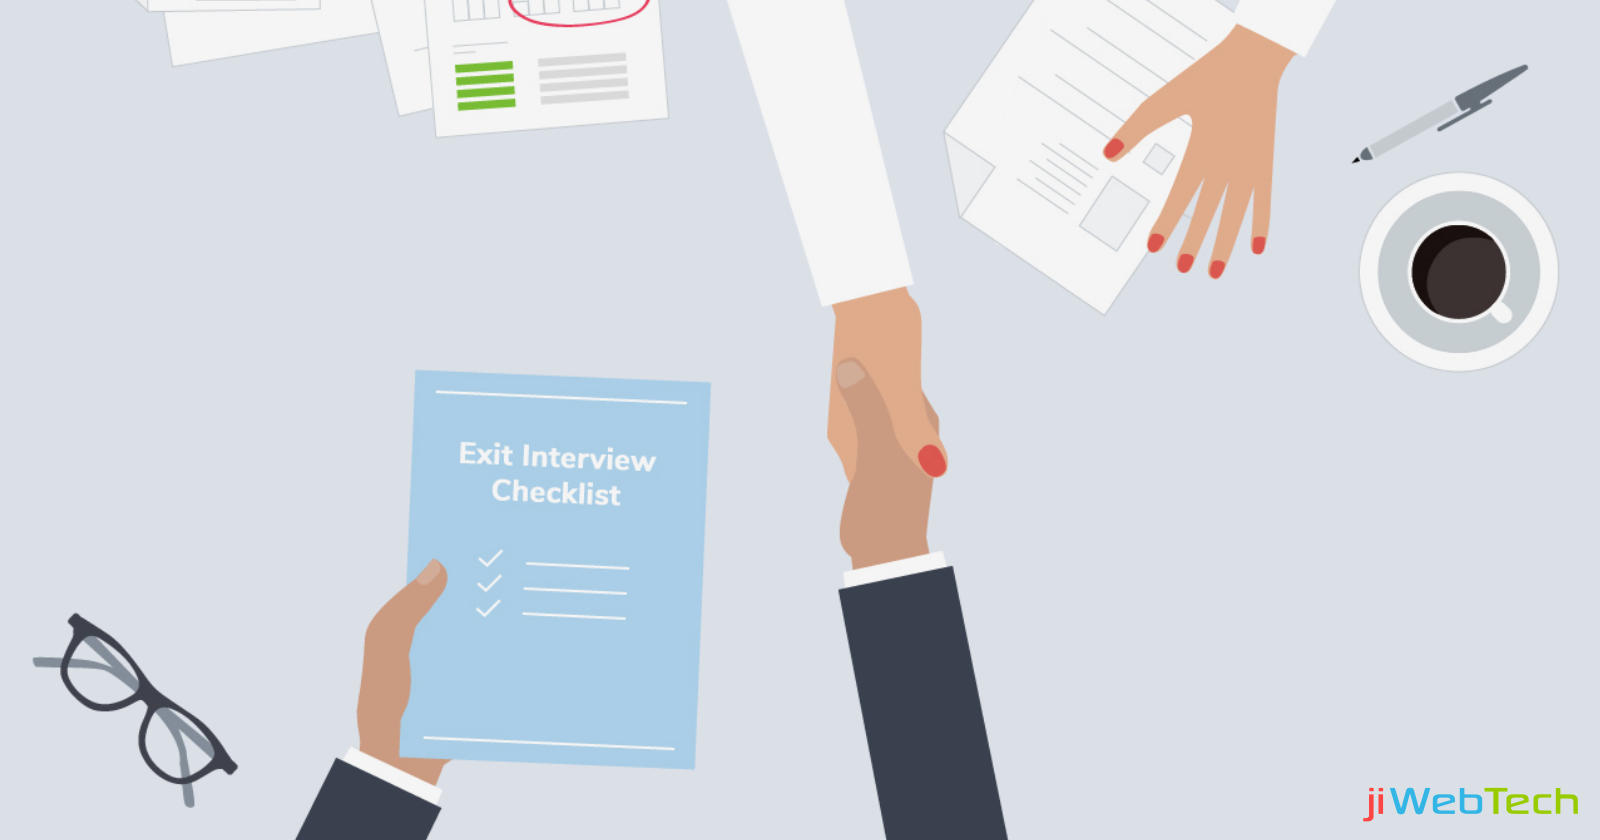 An Excellent Guide for Exit Interviews in an Organization